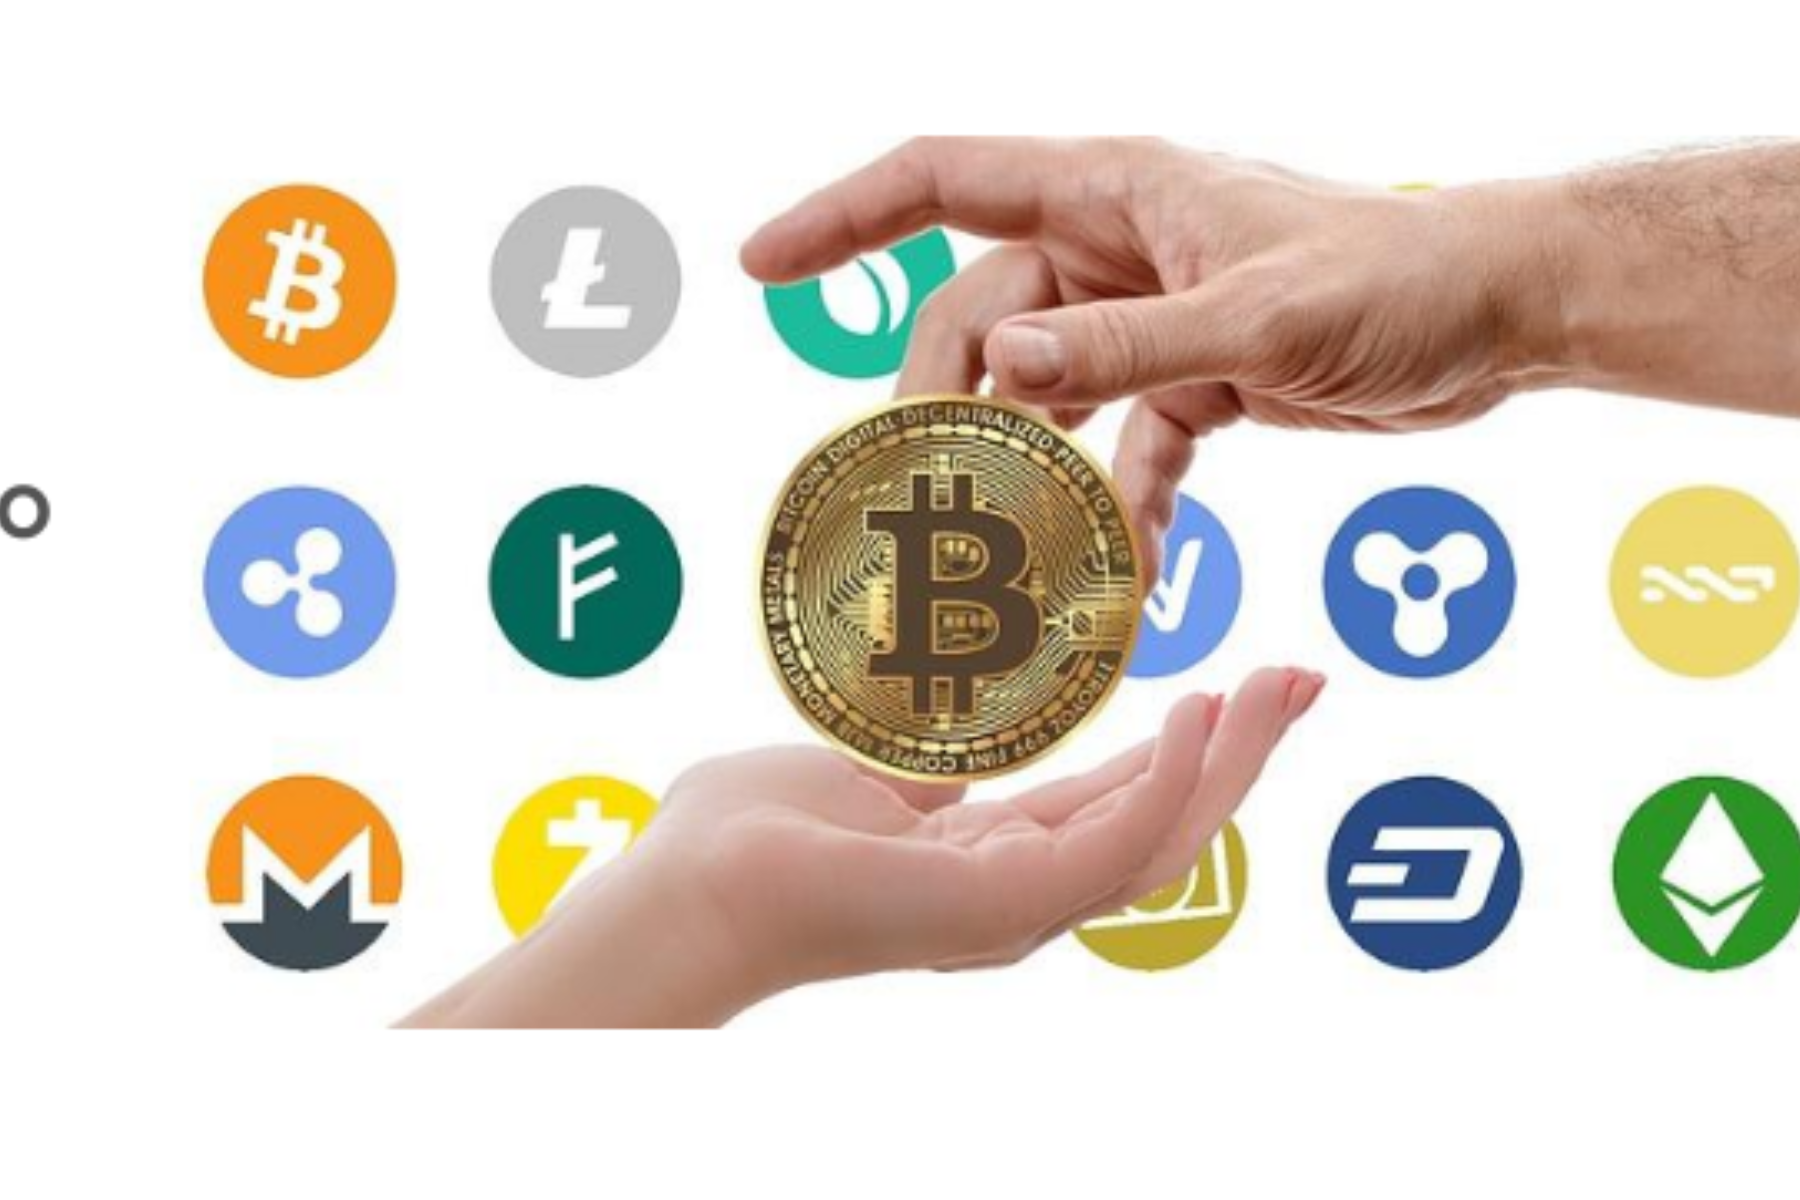 The two hands holding a physical Bitcoin in the foreground. The hands are positioned in front of a background featuring a collection of various cryptocurrency symbols and gems